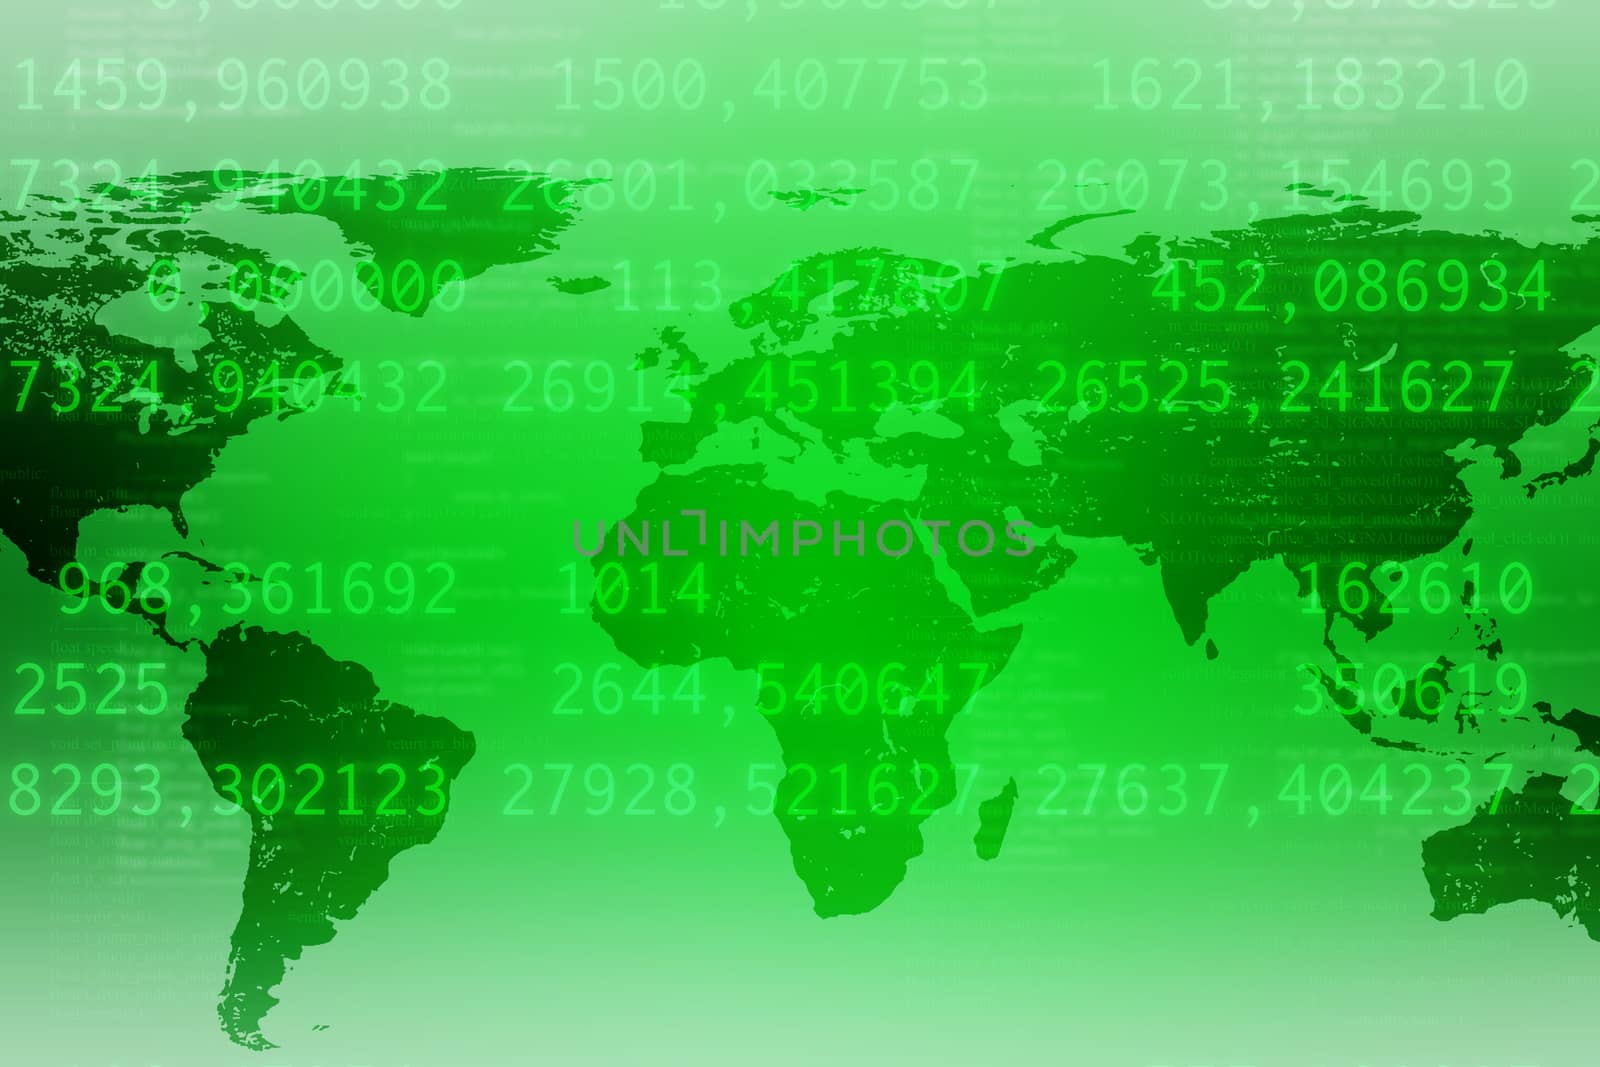 Abstract green background with world map and numbers